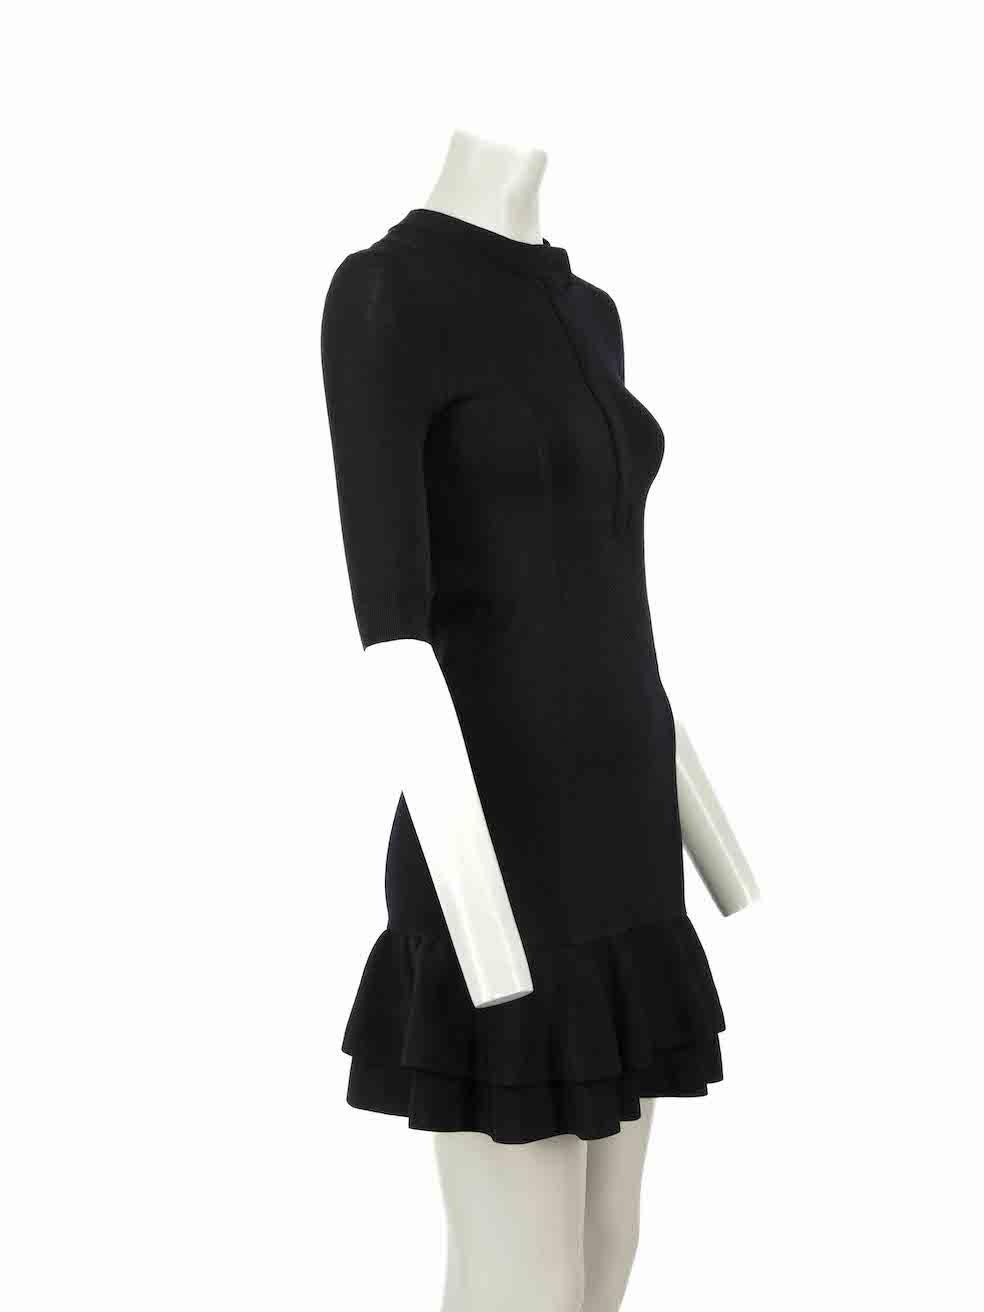 CONDITION is Very good. Hardly any visible wear to dress is evident on this used Veronica Beard designer resale item.
 
Details
Black
Viscose
Mini dress
Round neckline
Stretchy and bodycon
Front zip up closure with snap buttons
Tiered skirt
 
Made